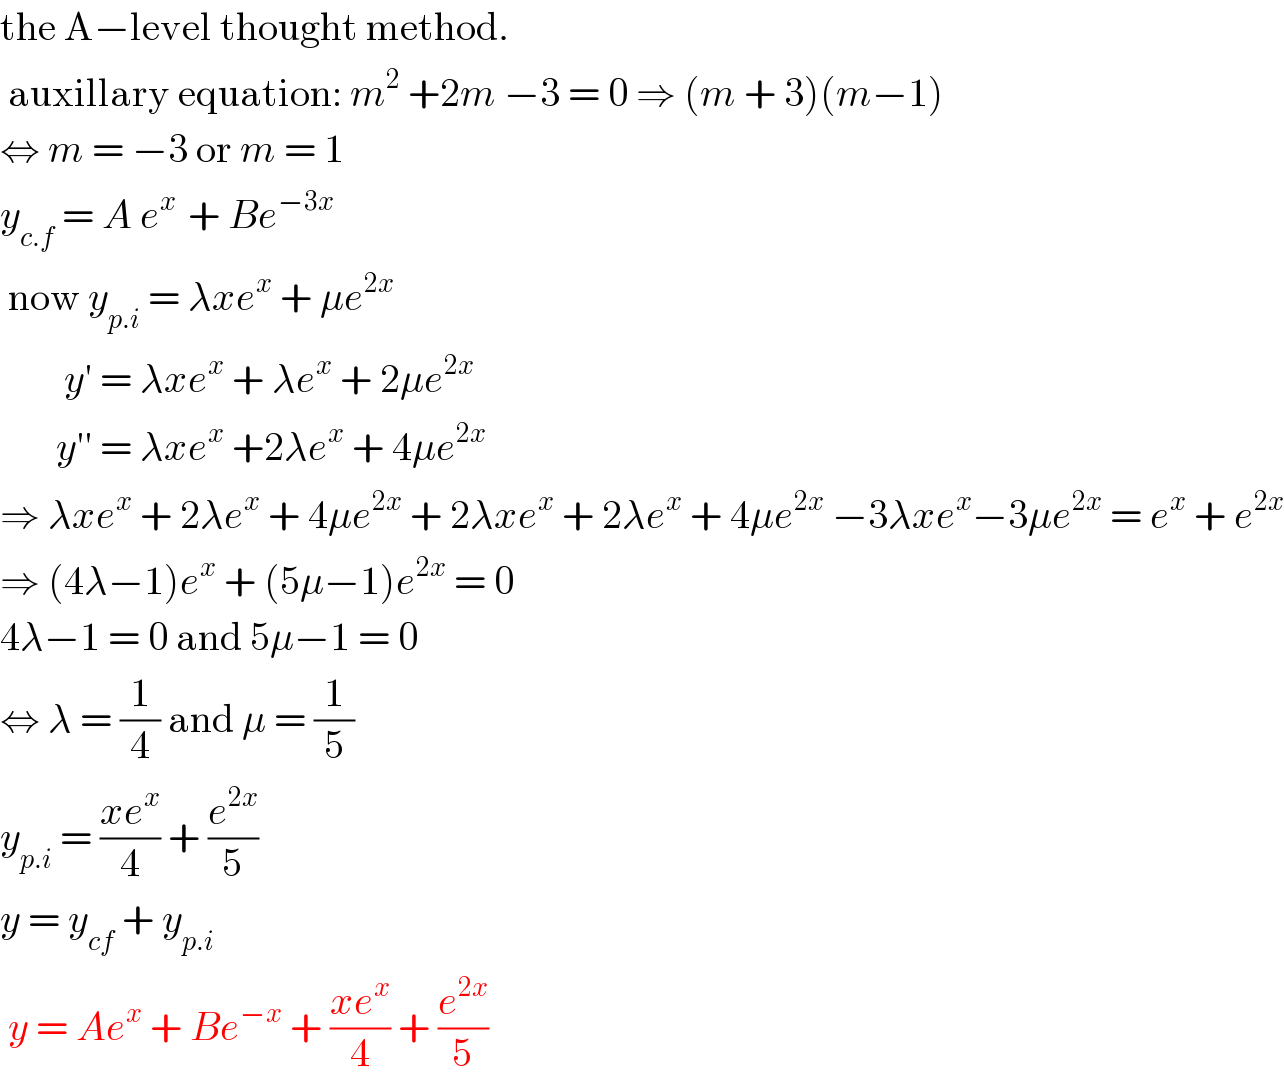 the A−level thought method.   auxillary equation: m^2  +2m −3 = 0 ⇒ (m + 3)(m−1)   ⇔ m = −3 or m = 1  y_(c.f)  = A e^(x )  + Be^(−3x)    now y_(p.i)  = λxe^x  + μe^(2x)           y′ = λxe^x  + λe^x  + 2μe^(2x)          y′′ = λxe^x  +2λe^x  + 4μe^(2x)   ⇒ λxe^x  + 2λe^x  + 4μe^(2x)  + 2λxe^x  + 2λe^x  + 4μe^(2x)  −3λxe^x −3μe^(2x)  = e^x  + e^(2x)   ⇒ (4λ−1)e^x  + (5μ−1)e^(2x)  = 0  4λ−1 = 0 and 5μ−1 = 0  ⇔ λ = (1/4) and μ = (1/5)  y_(p.i)  = ((xe^x )/4) + (e^(2x) /5)  y = y_(cf)  + y_(p.i)    y = Ae^x  + Be^(−x)  + ((xe^x )/4) + (e^(2x) /5)  